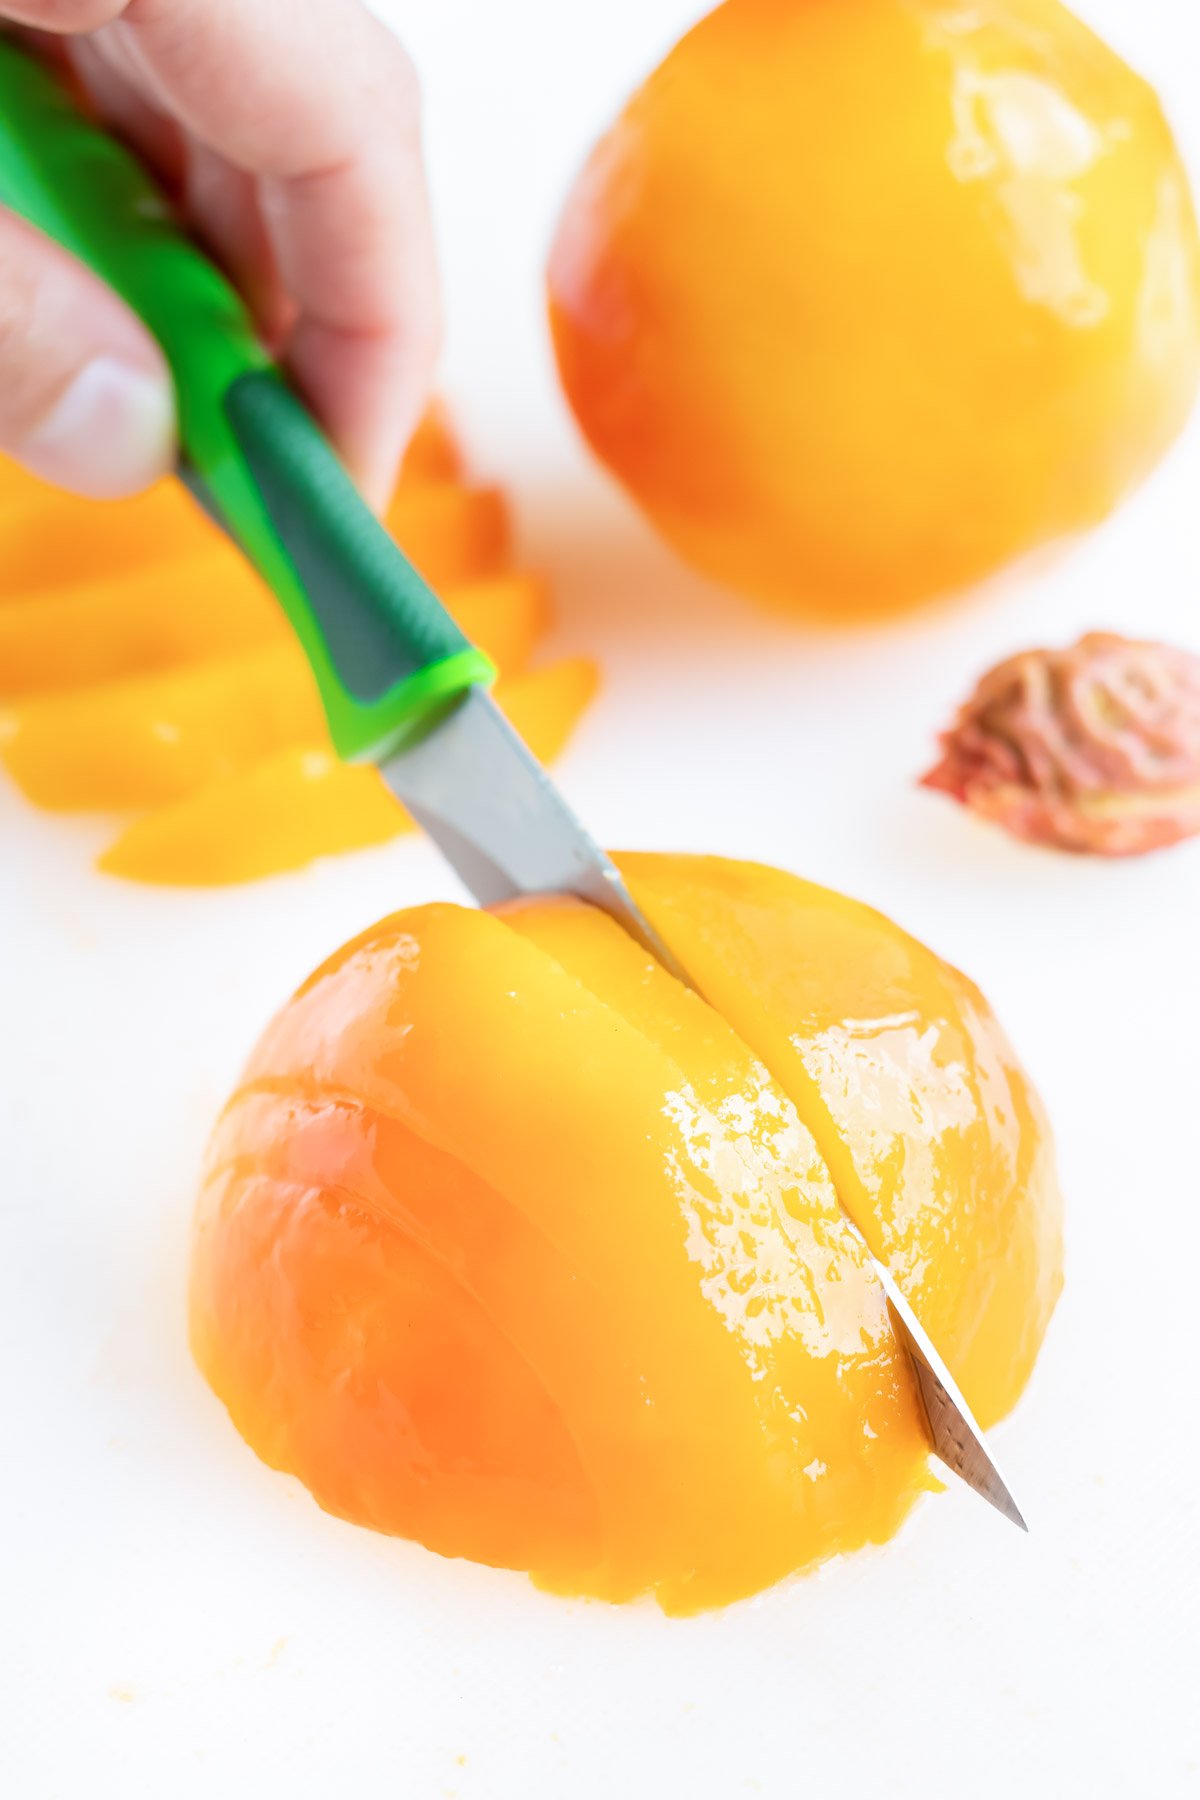 Once the pit is removed, lay one side of the peach down in preparation for slicing.